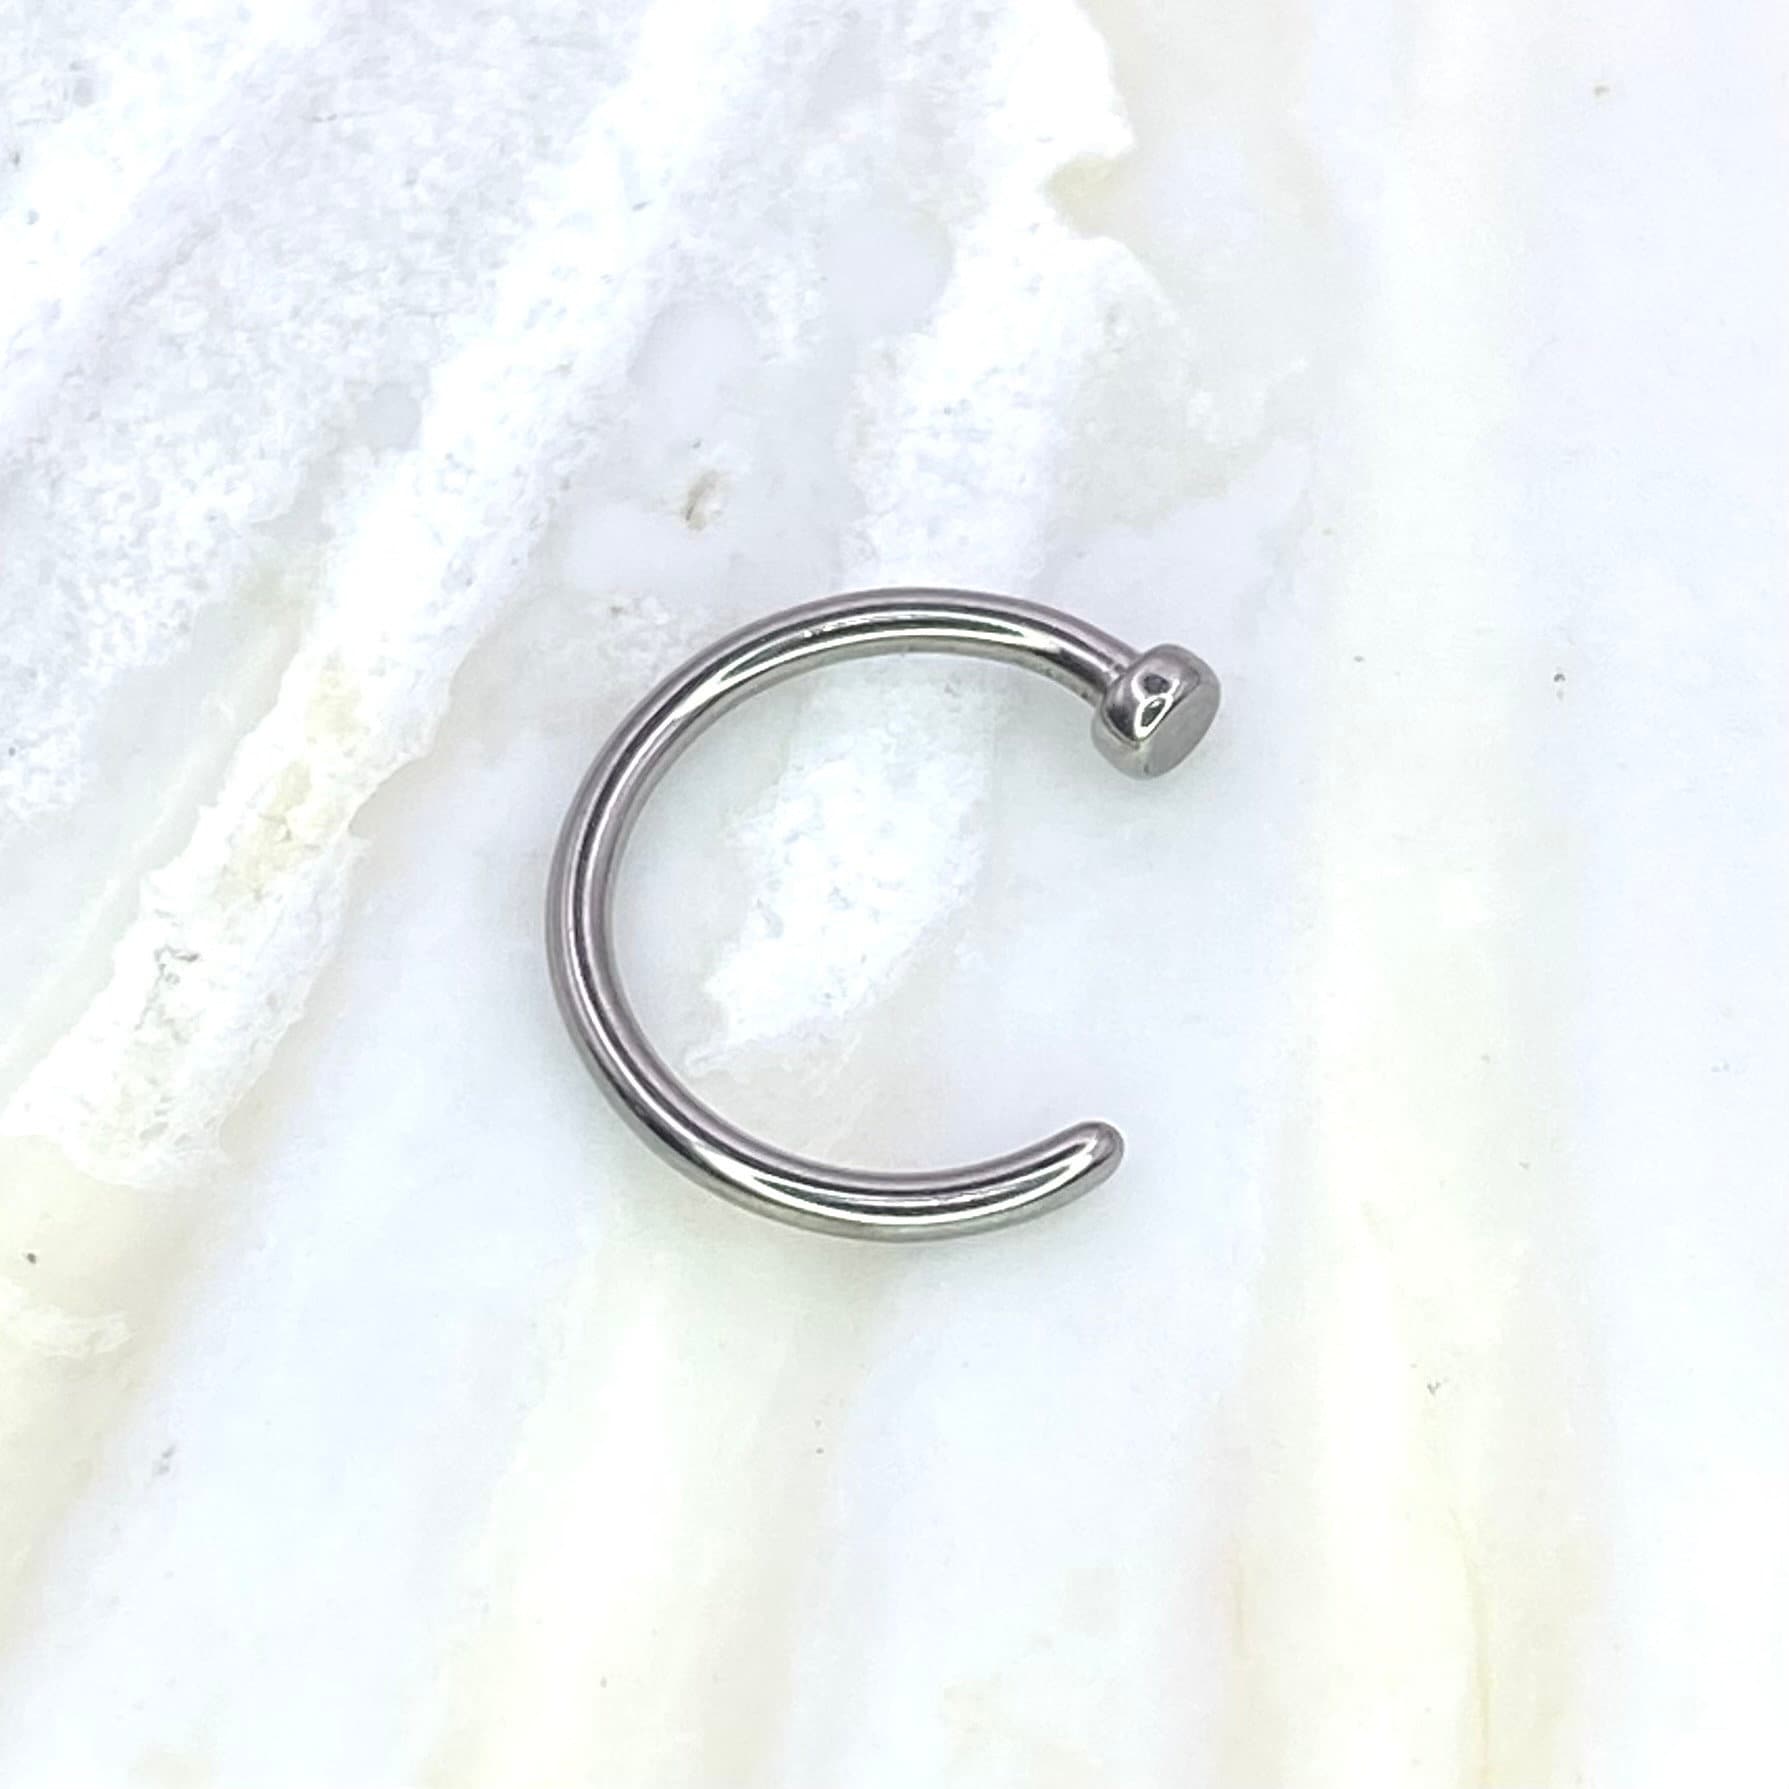 Bulk-buy Hinged Nose Septum Ring-Titanium Nose Rings Hoop Body Piercing  Jewelry 16g 6mm to 12mm price comparison